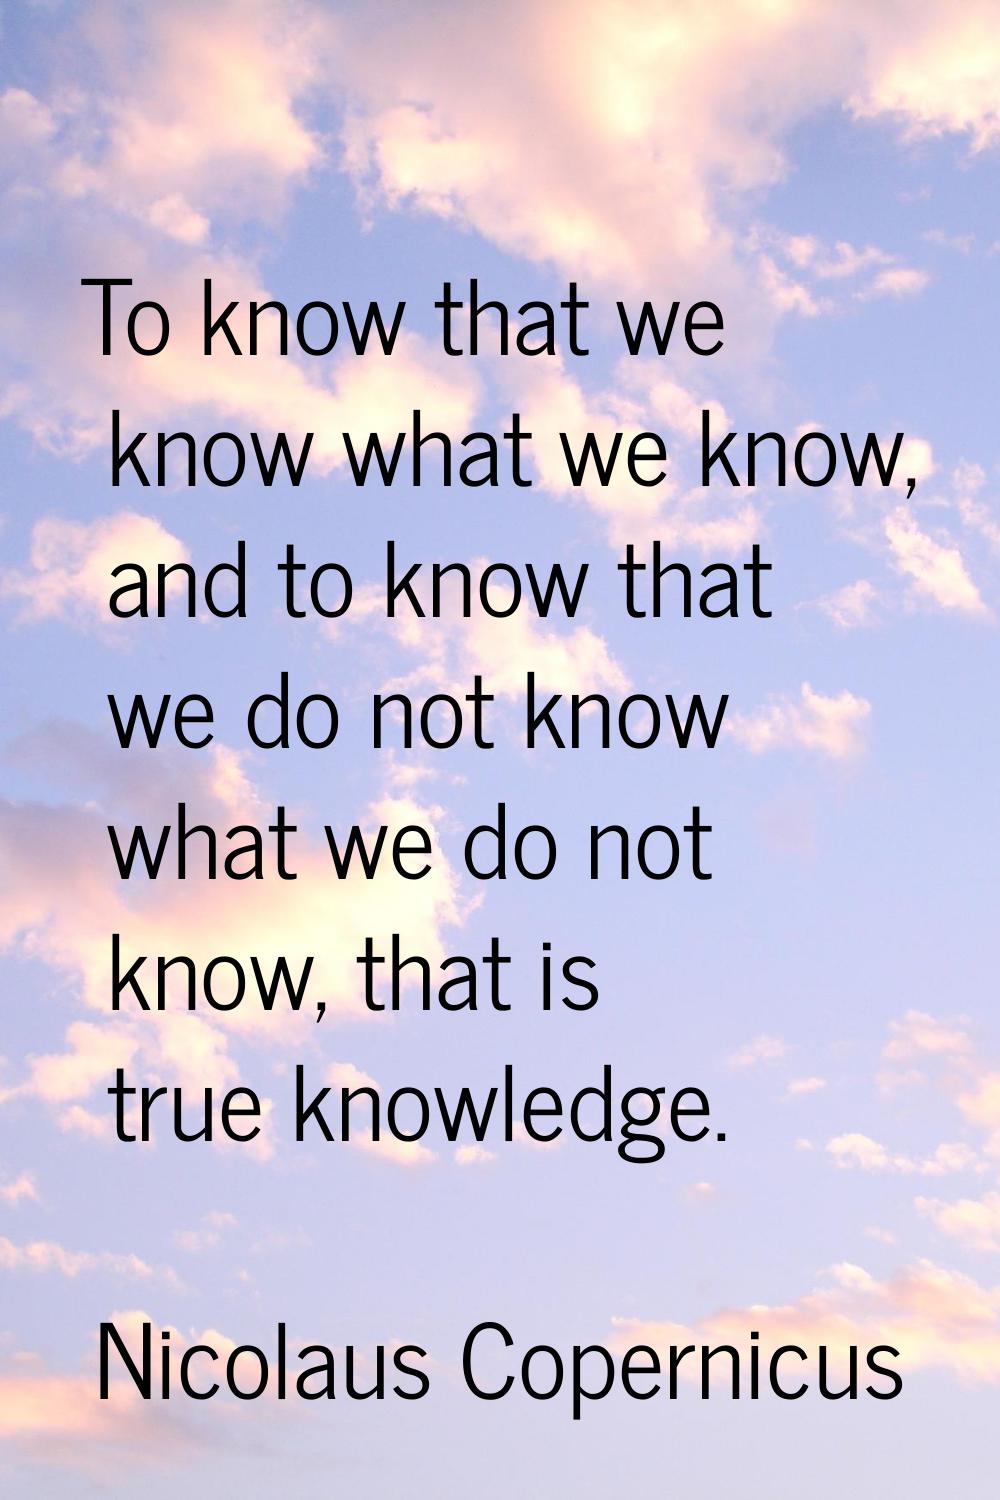 To know that we know what we know, and to know that we do not know what we do not know, that is tru